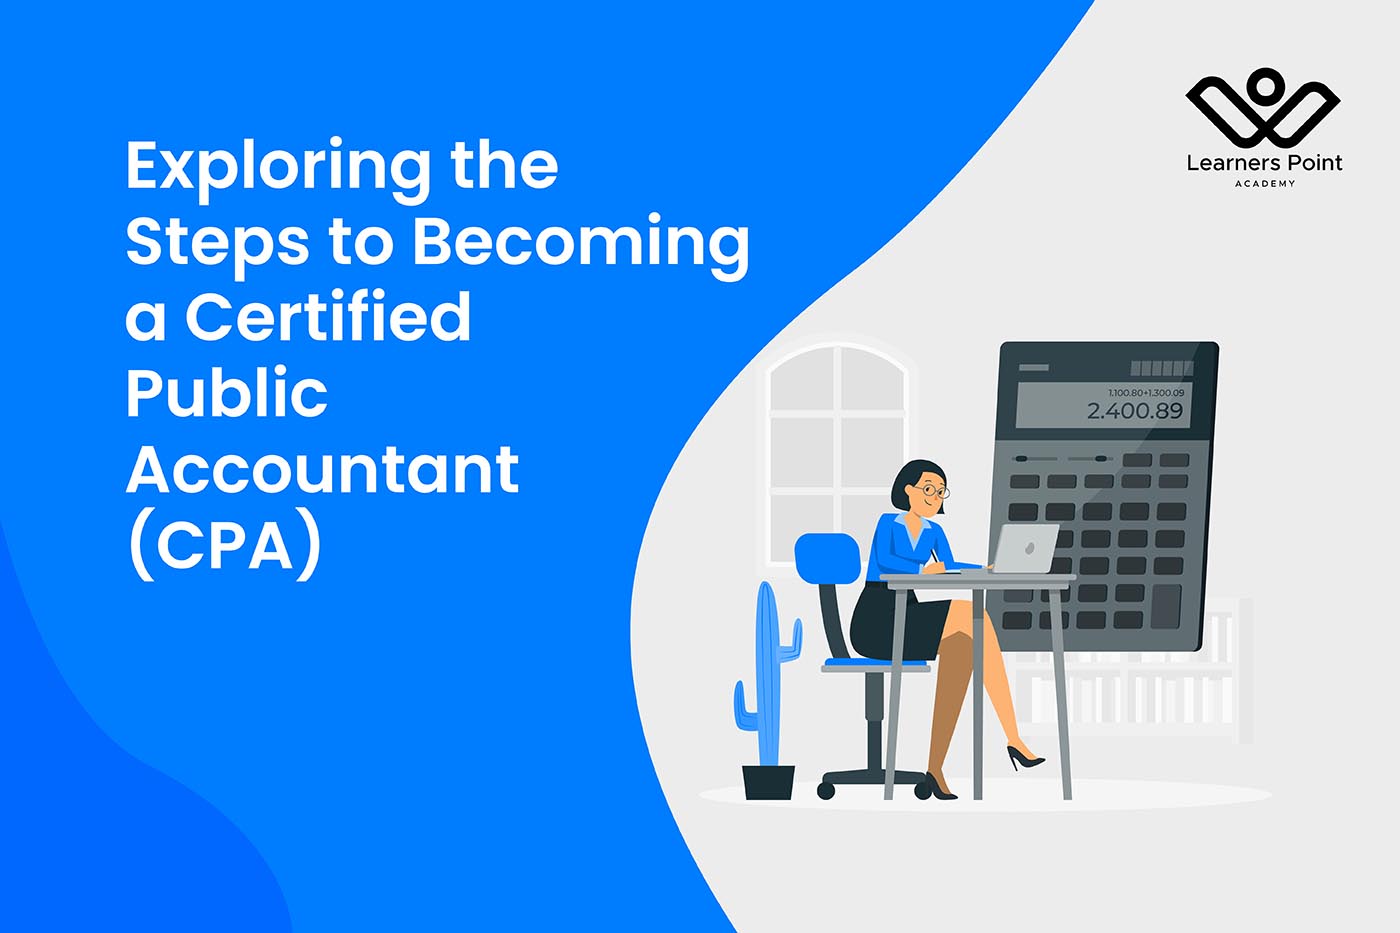 Exploring the Steps to Becoming a Certified Public Accountant (CPA)